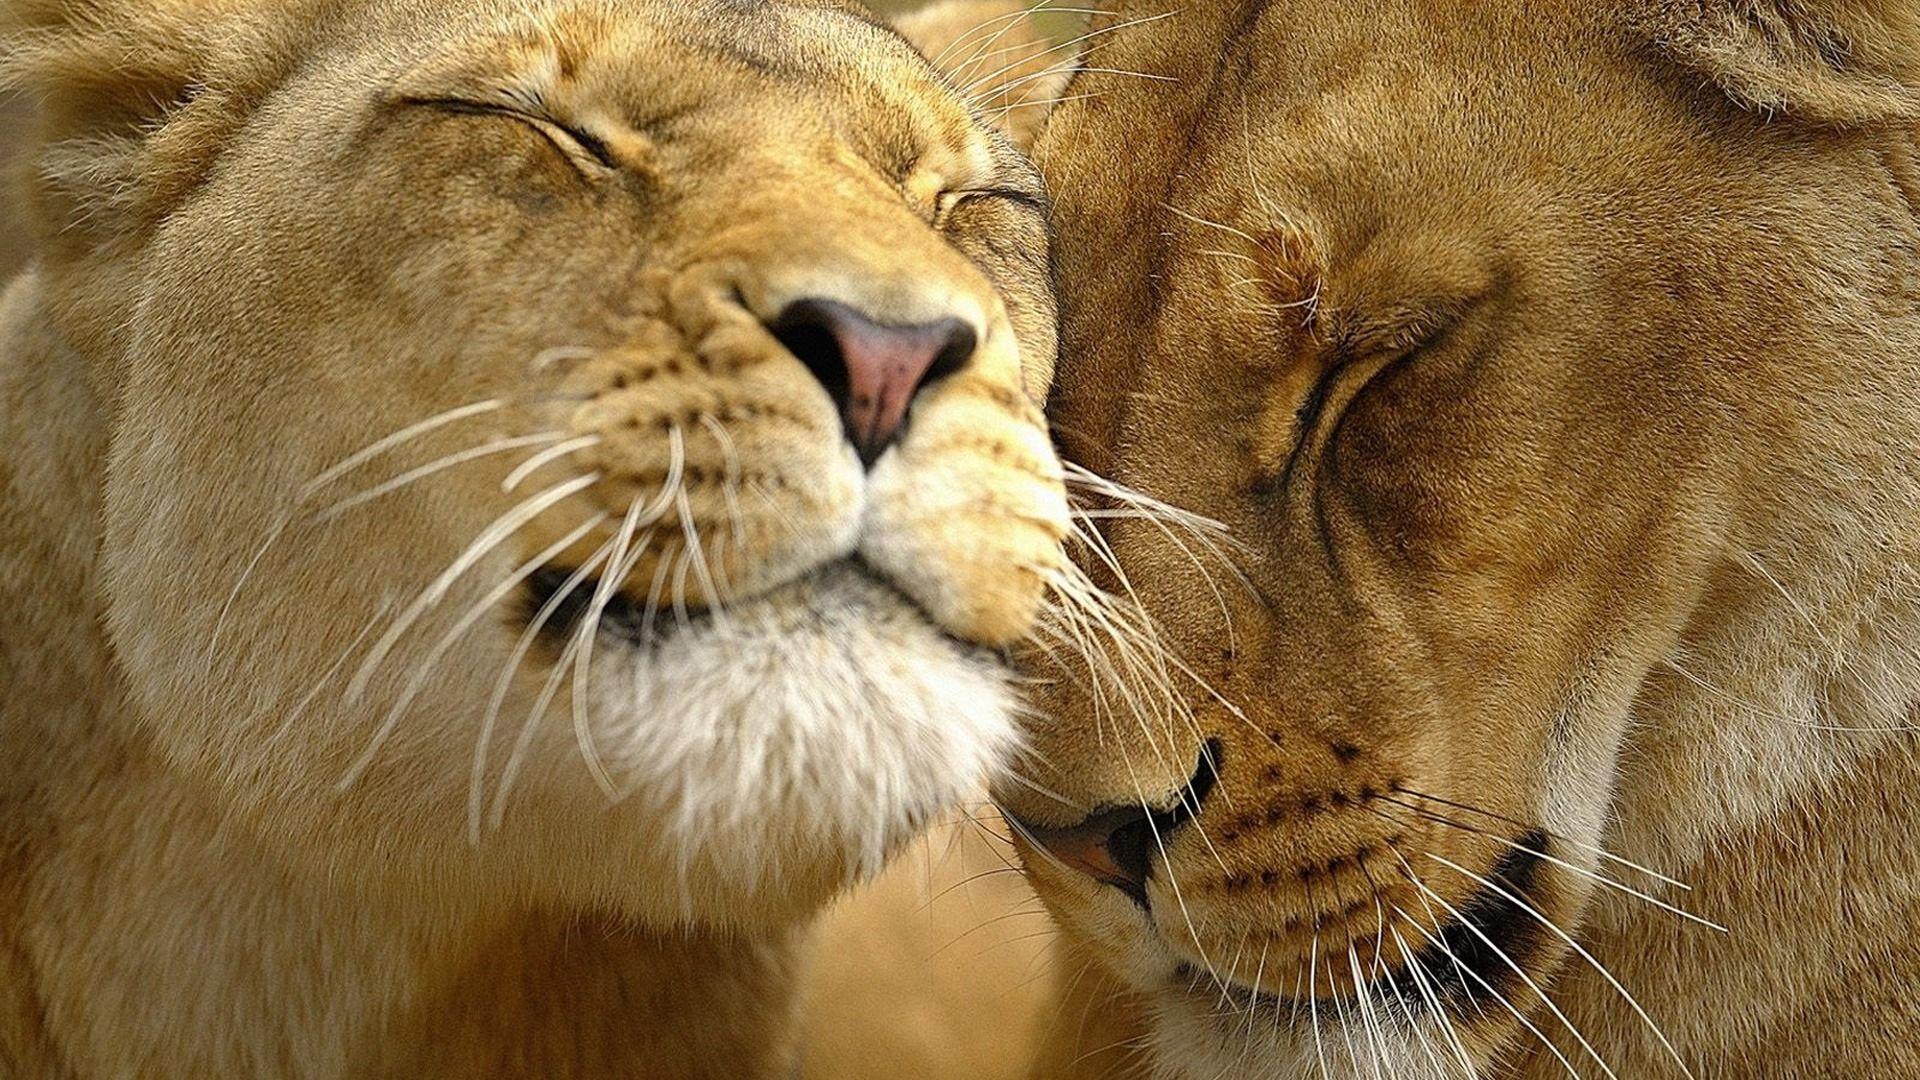 Lions in Love Wallpaper Big Cats Animals Wallpaper in jpg format for free download